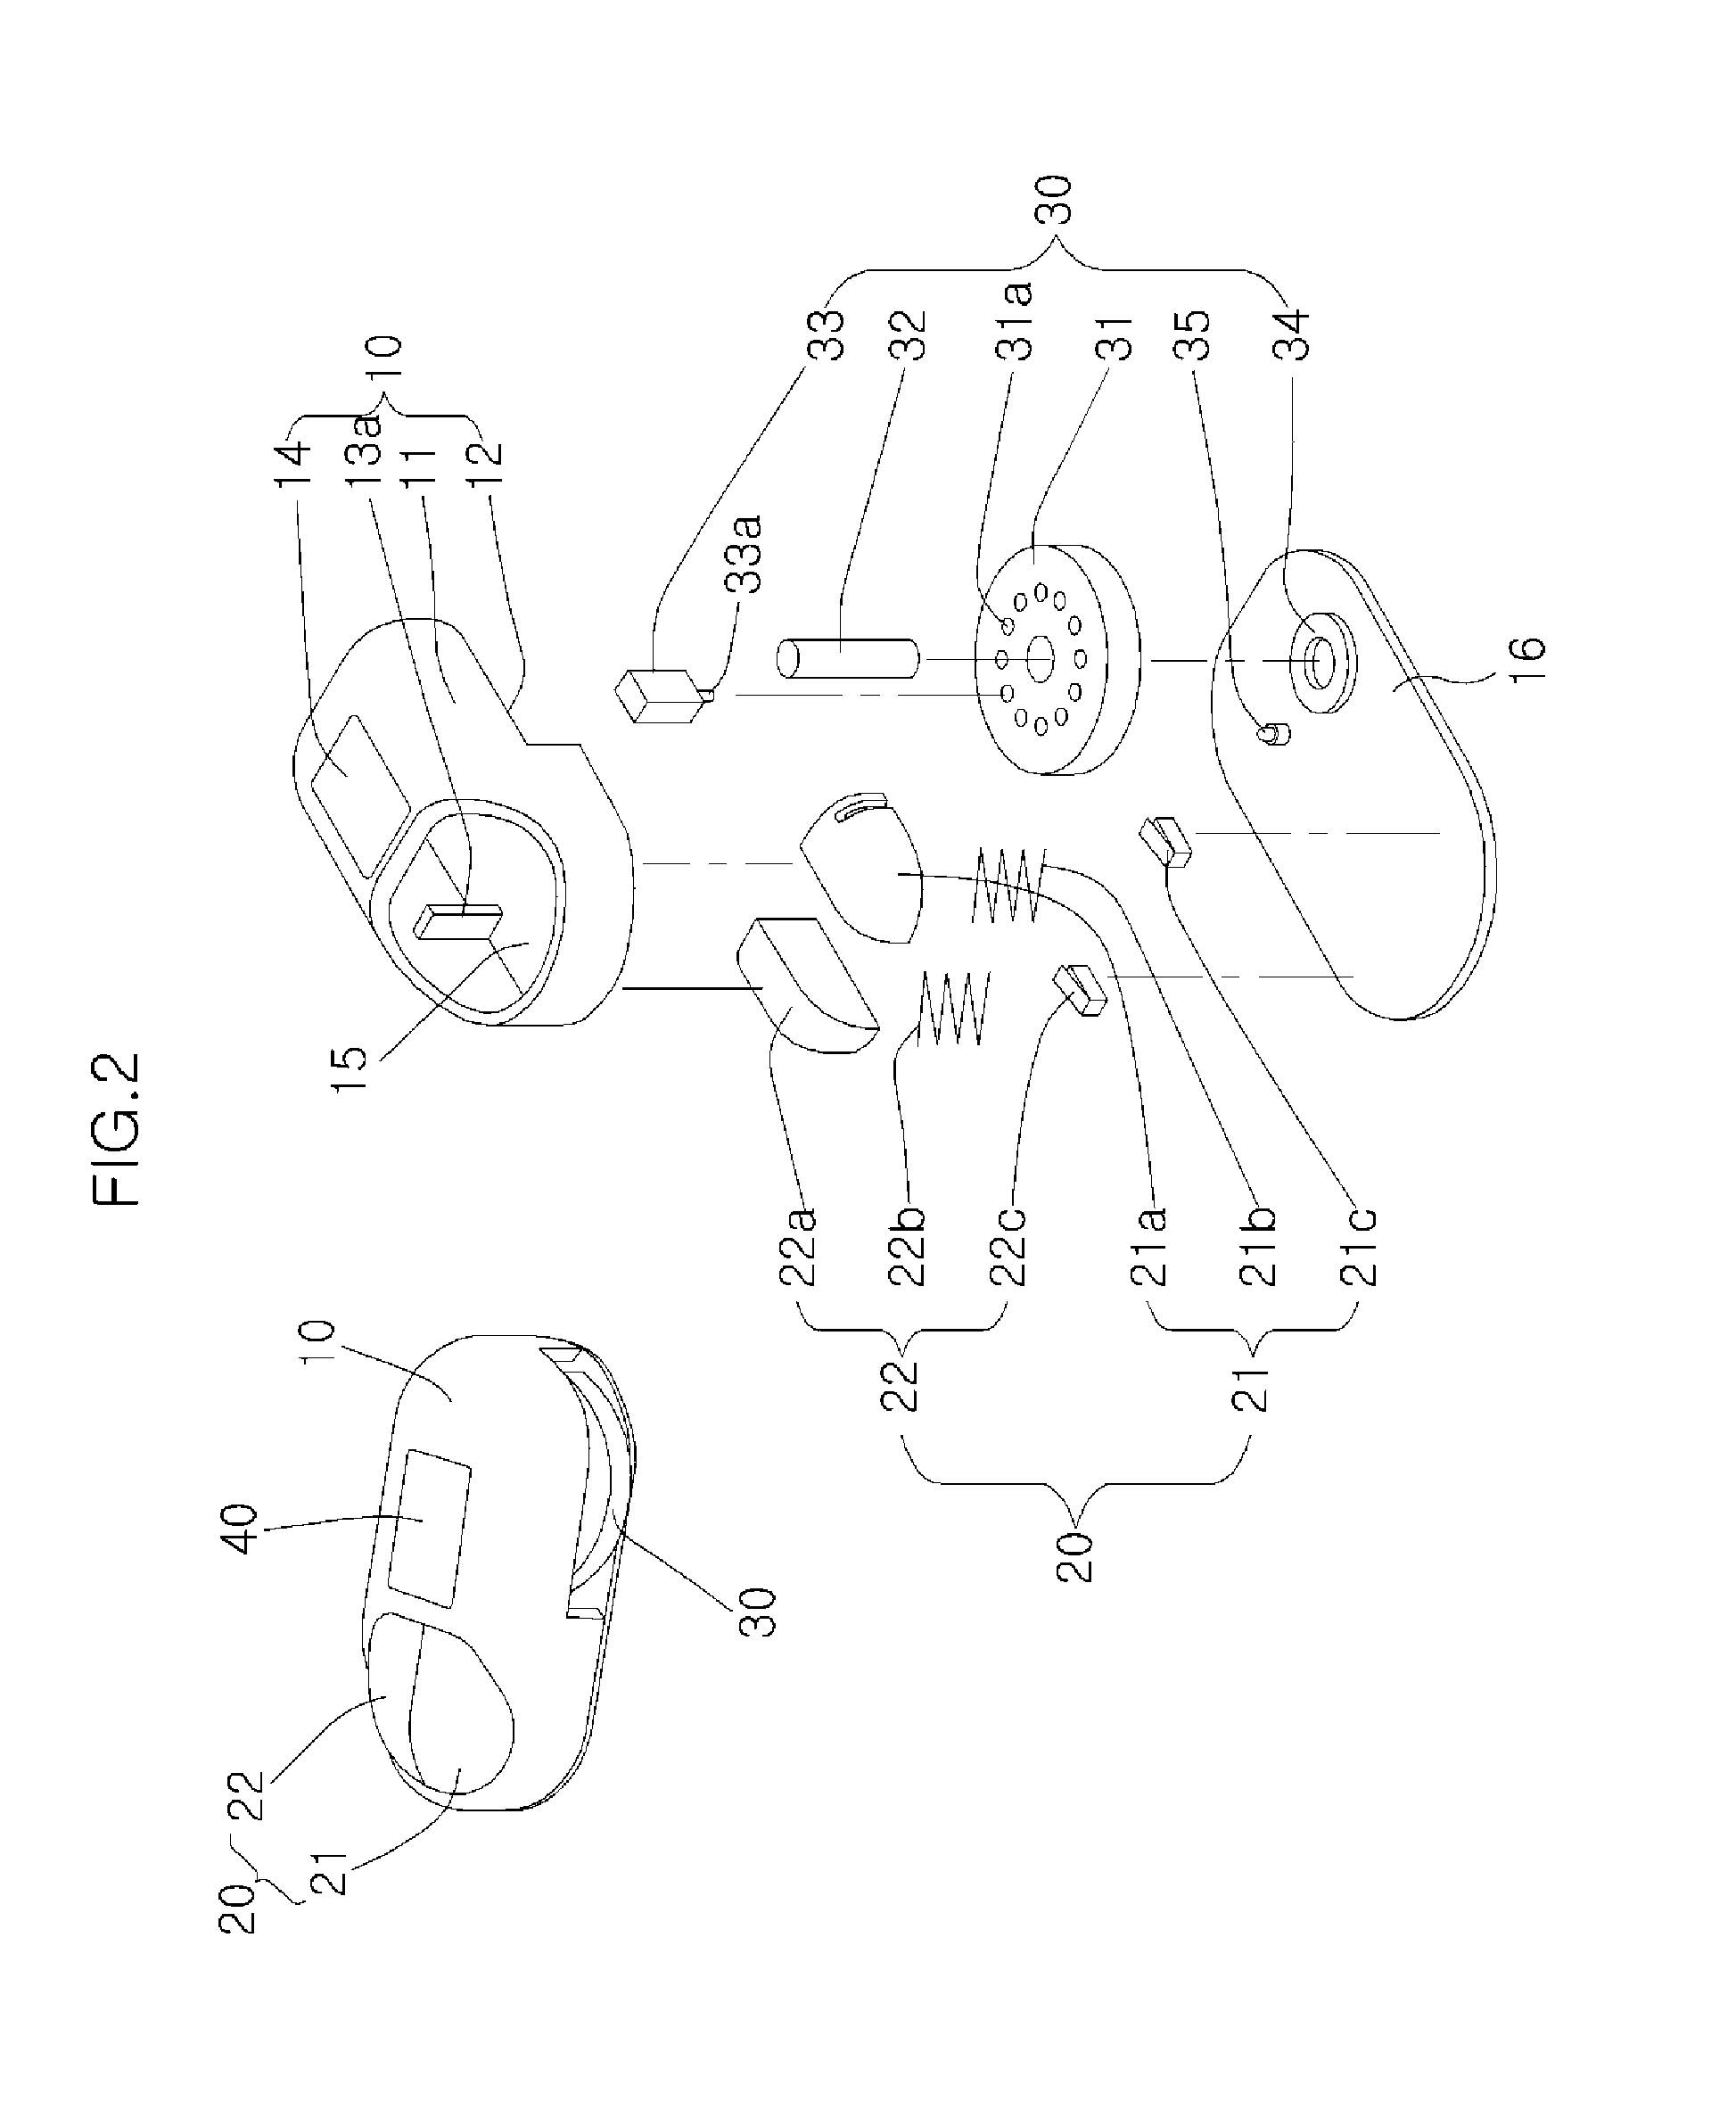 Auto transmission lever mouse device for shift by wire system